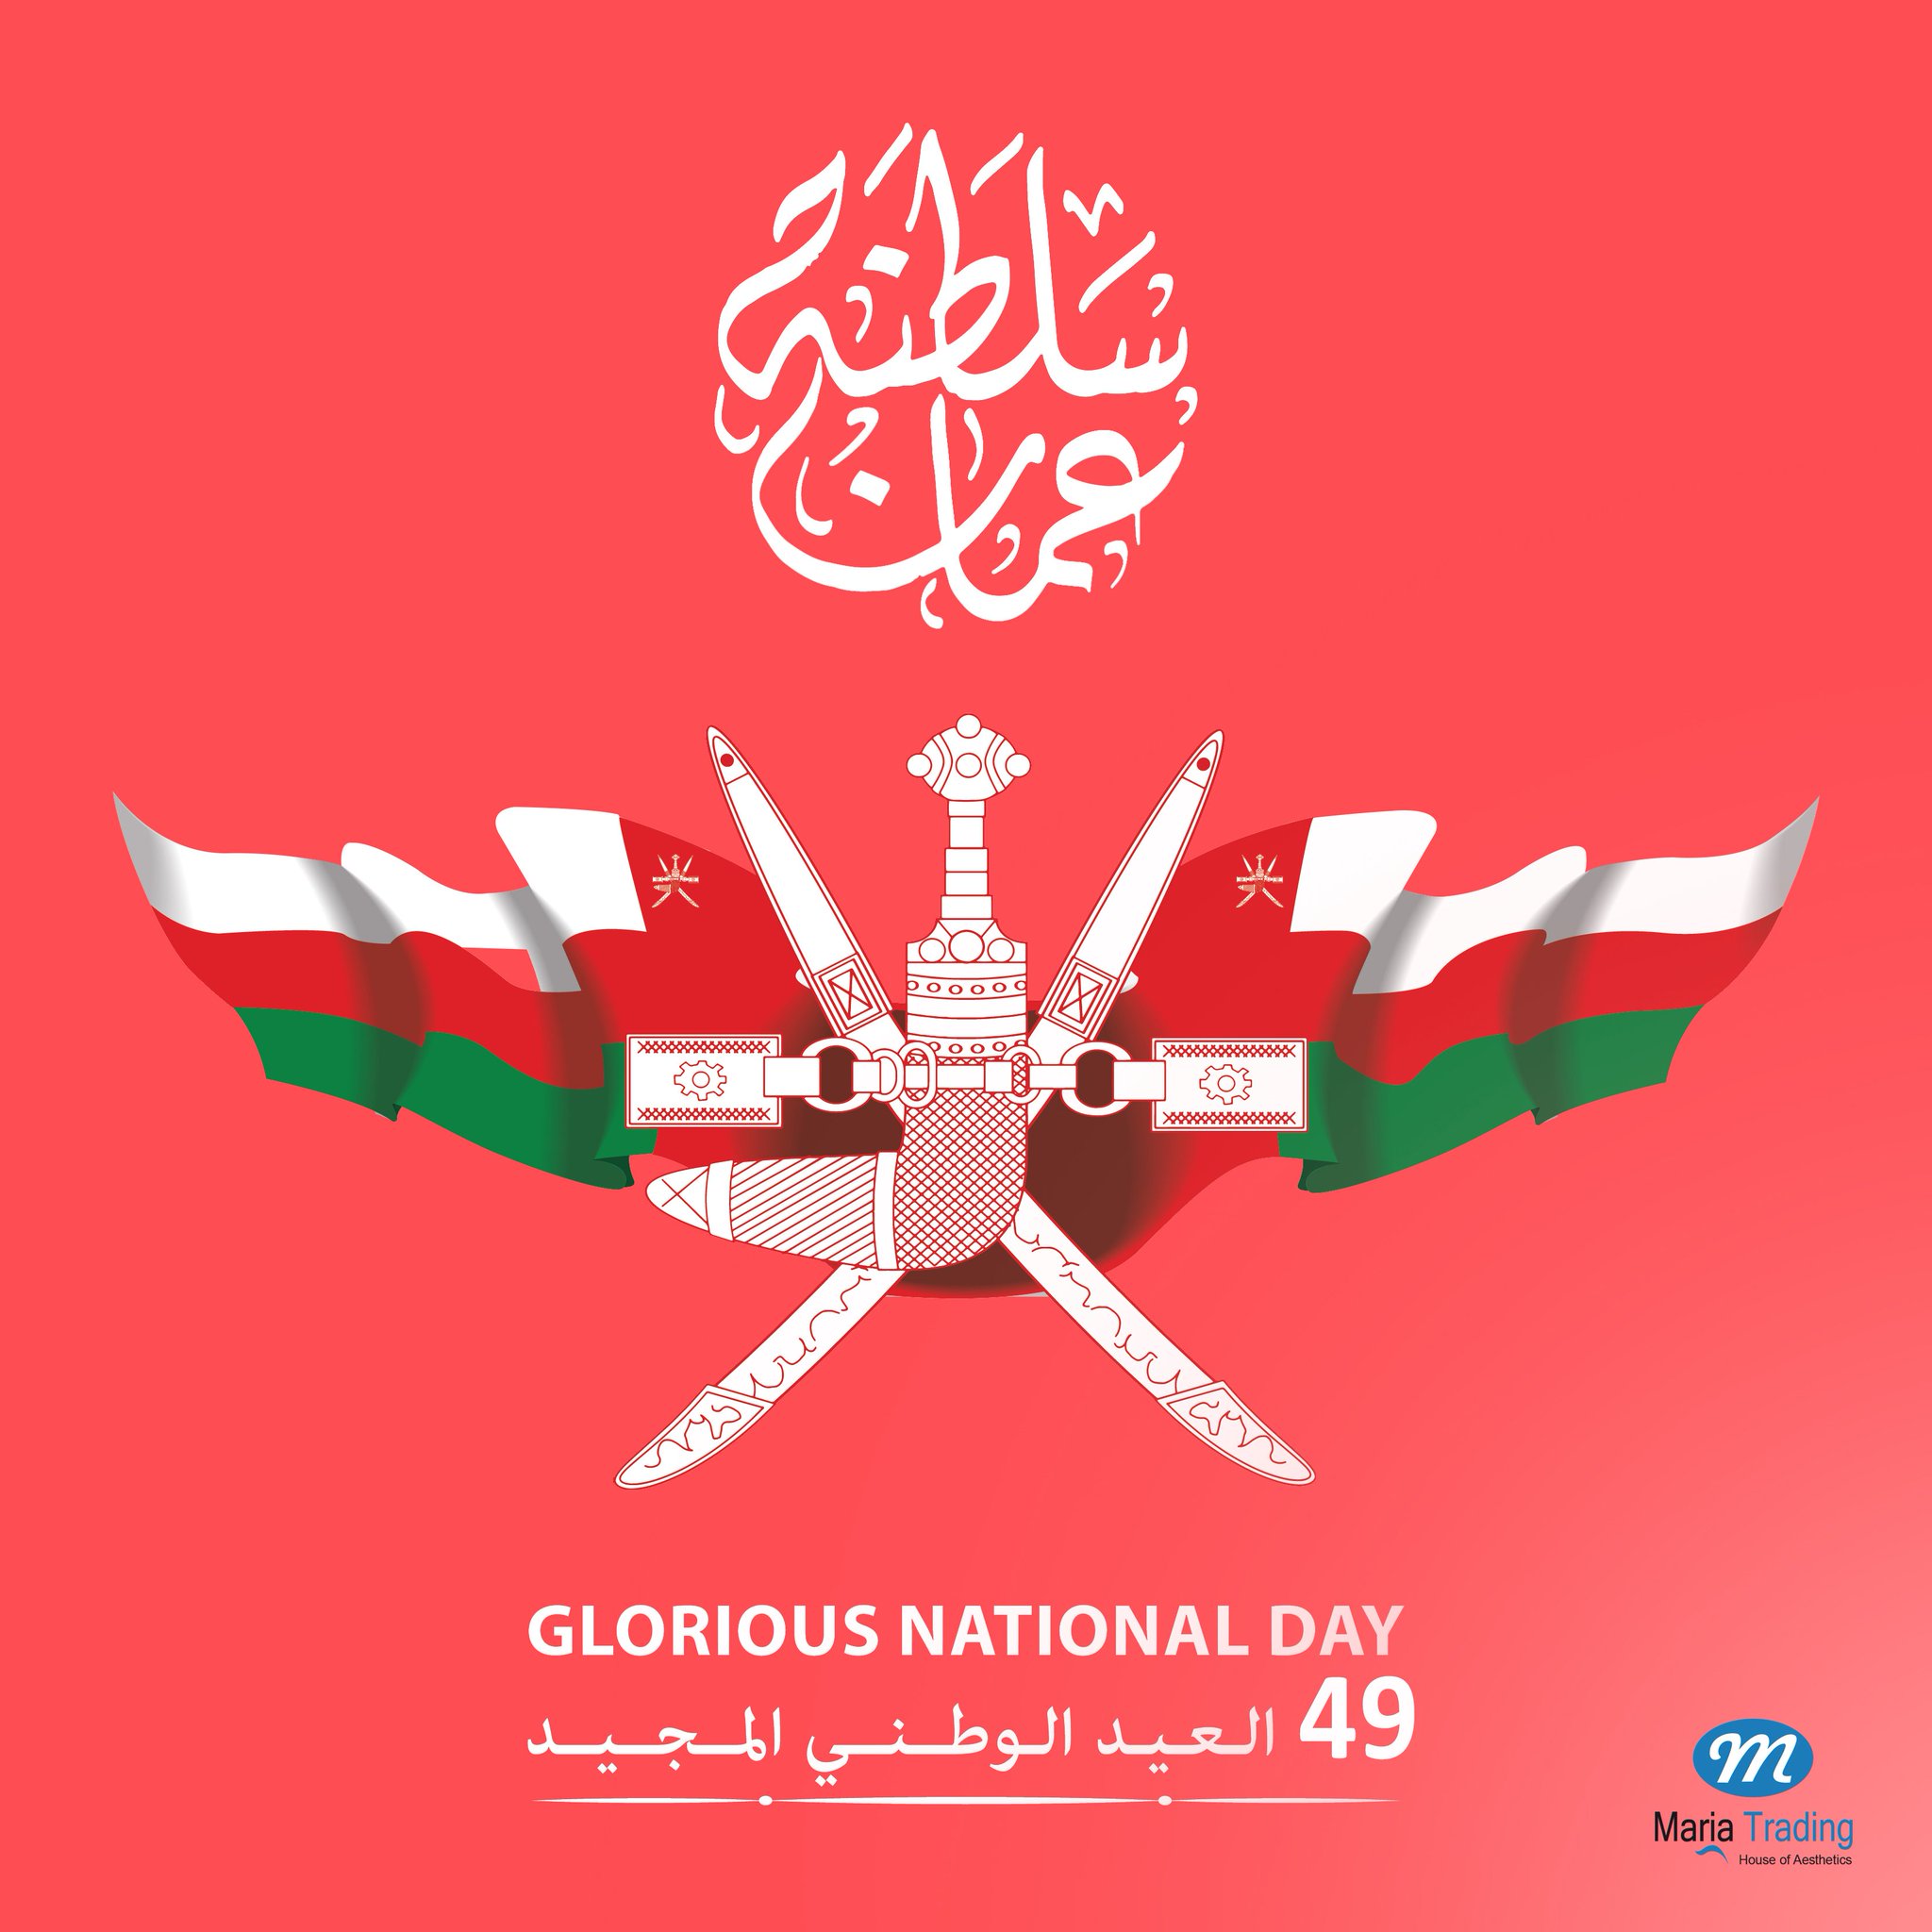 maria trading-mian trading-NAtional Day Oman-best aesthetic product in uae